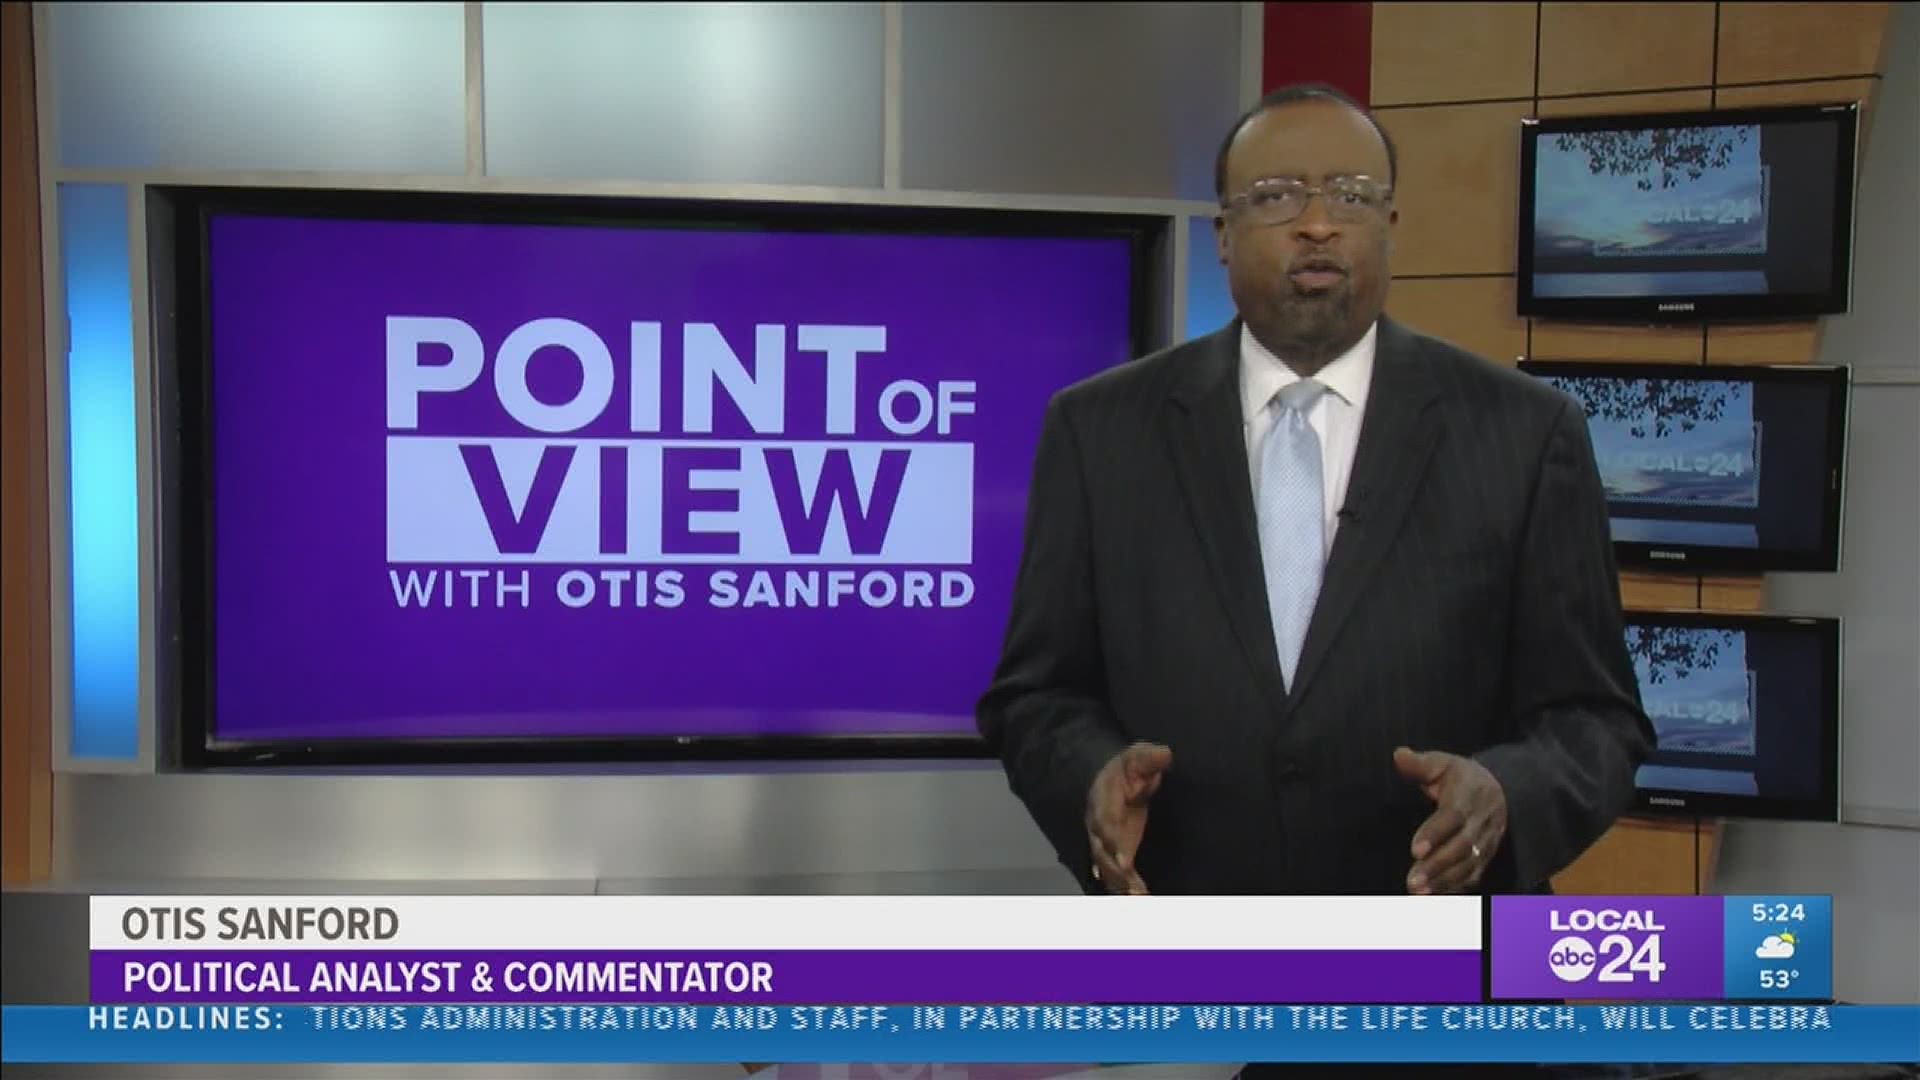 Local 24 News political analyst and commentator Otis Sanford shares his point of view on many Republicans’ refusal to acknowledge Joe Biden’s victory.